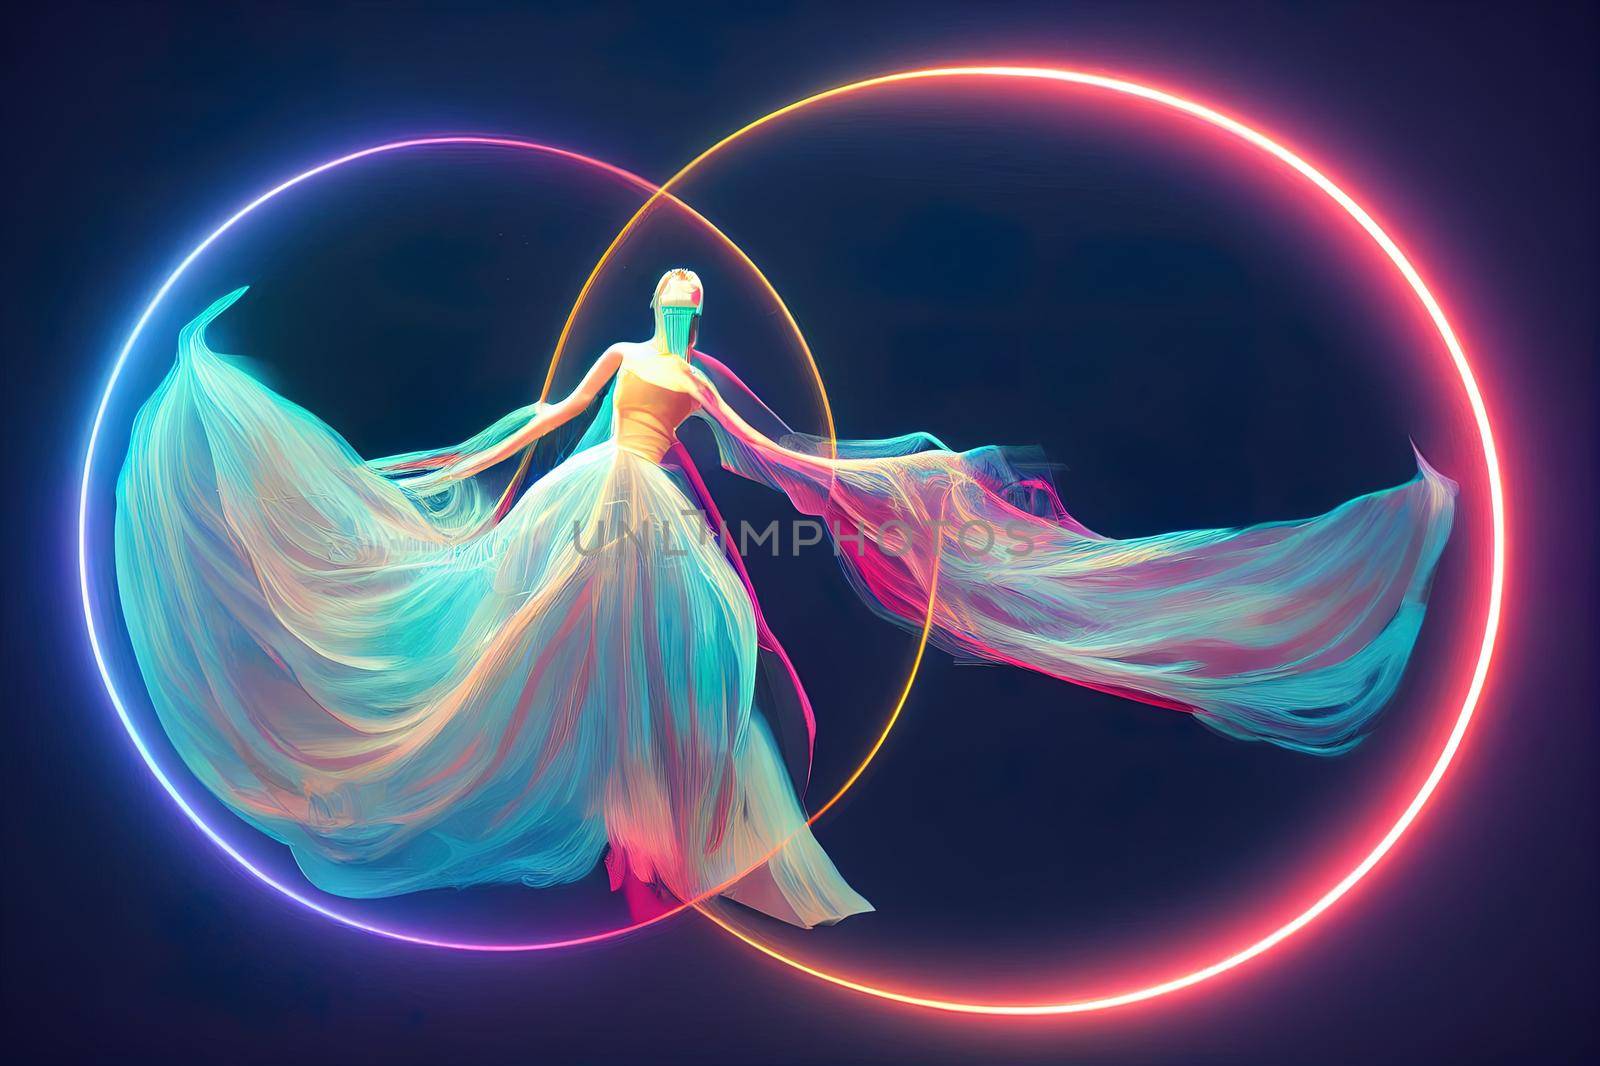 Between worlds fantasy concept. A women reaching up into a glowing loop of light. Futuristic women portrait 3d illustration.